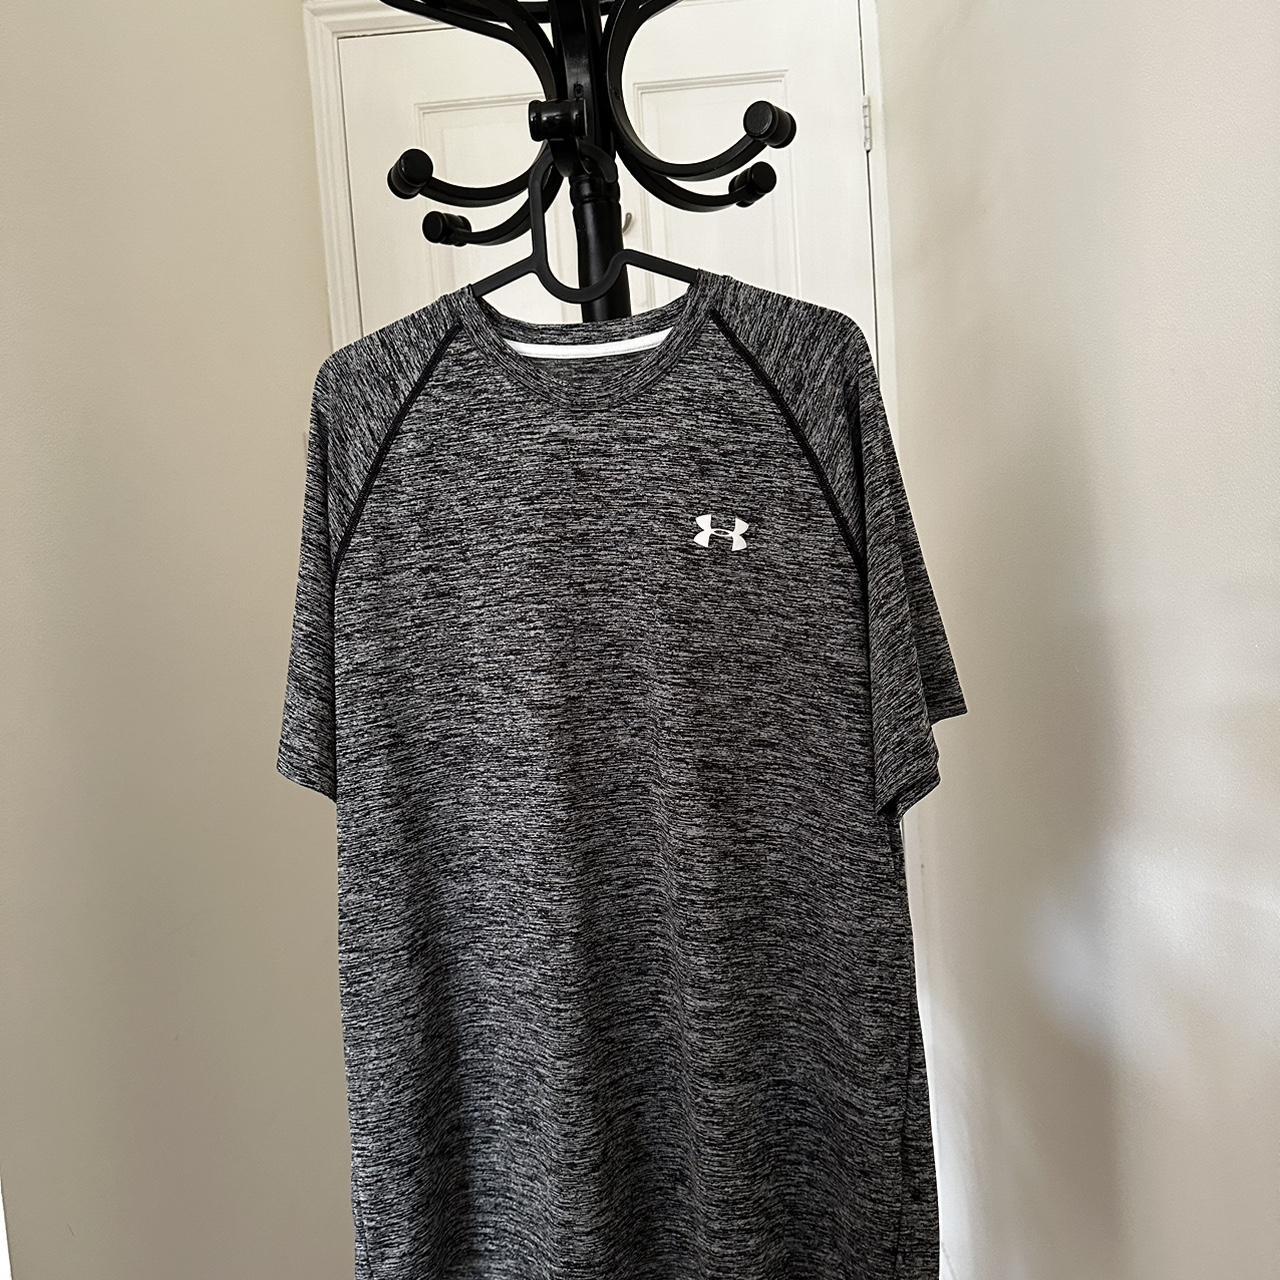 Grey under armour patterned gym training t shirt,... - Depop